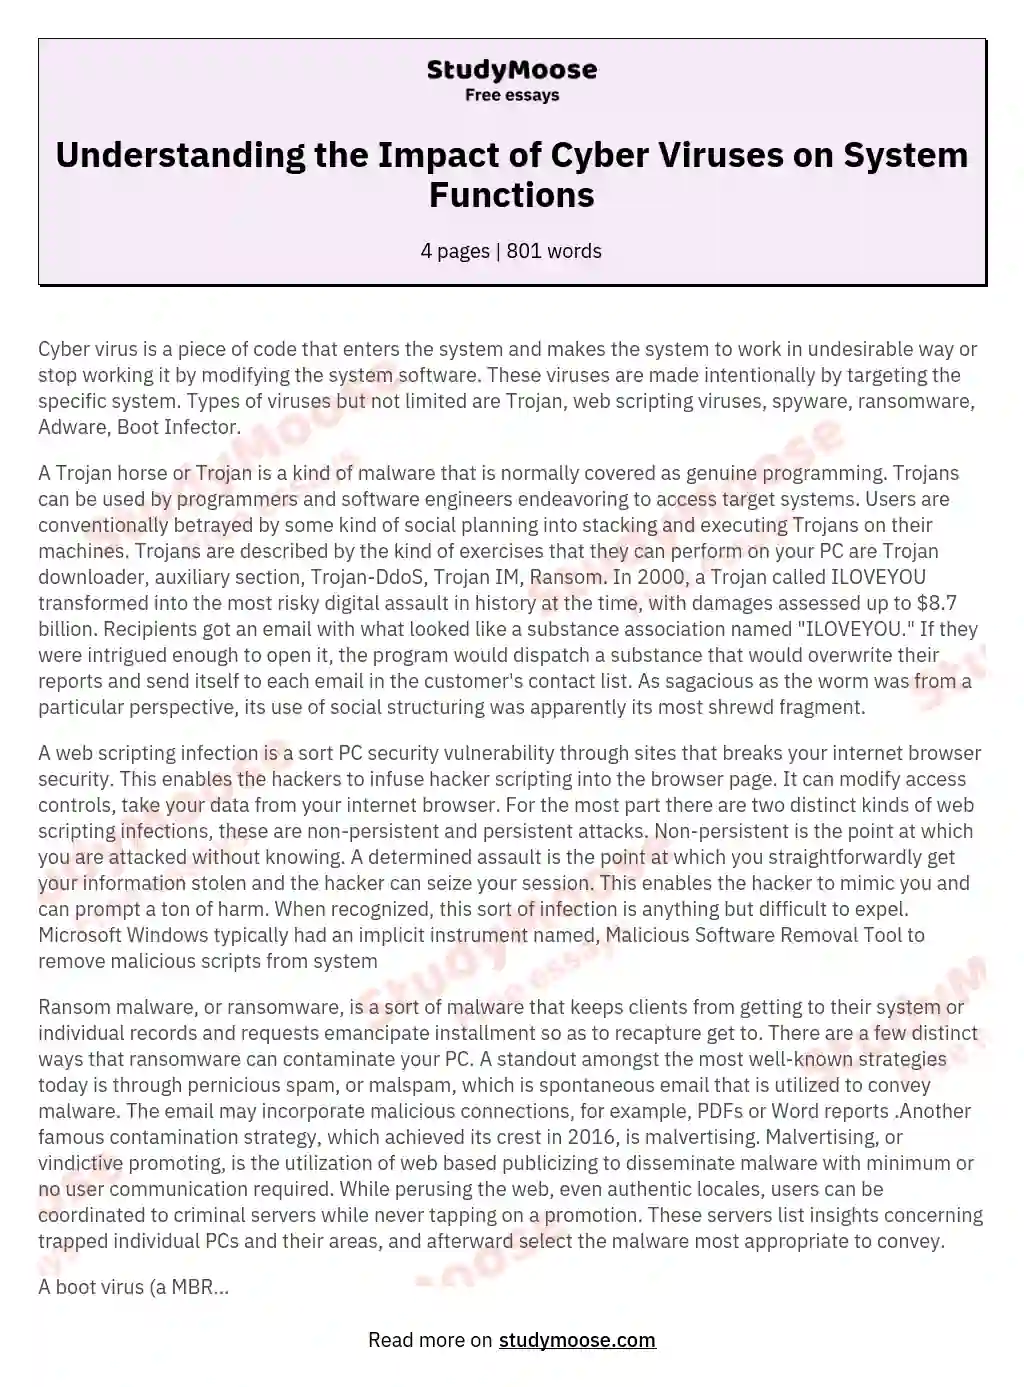 Understanding the Impact of Cyber Viruses on System Functions essay